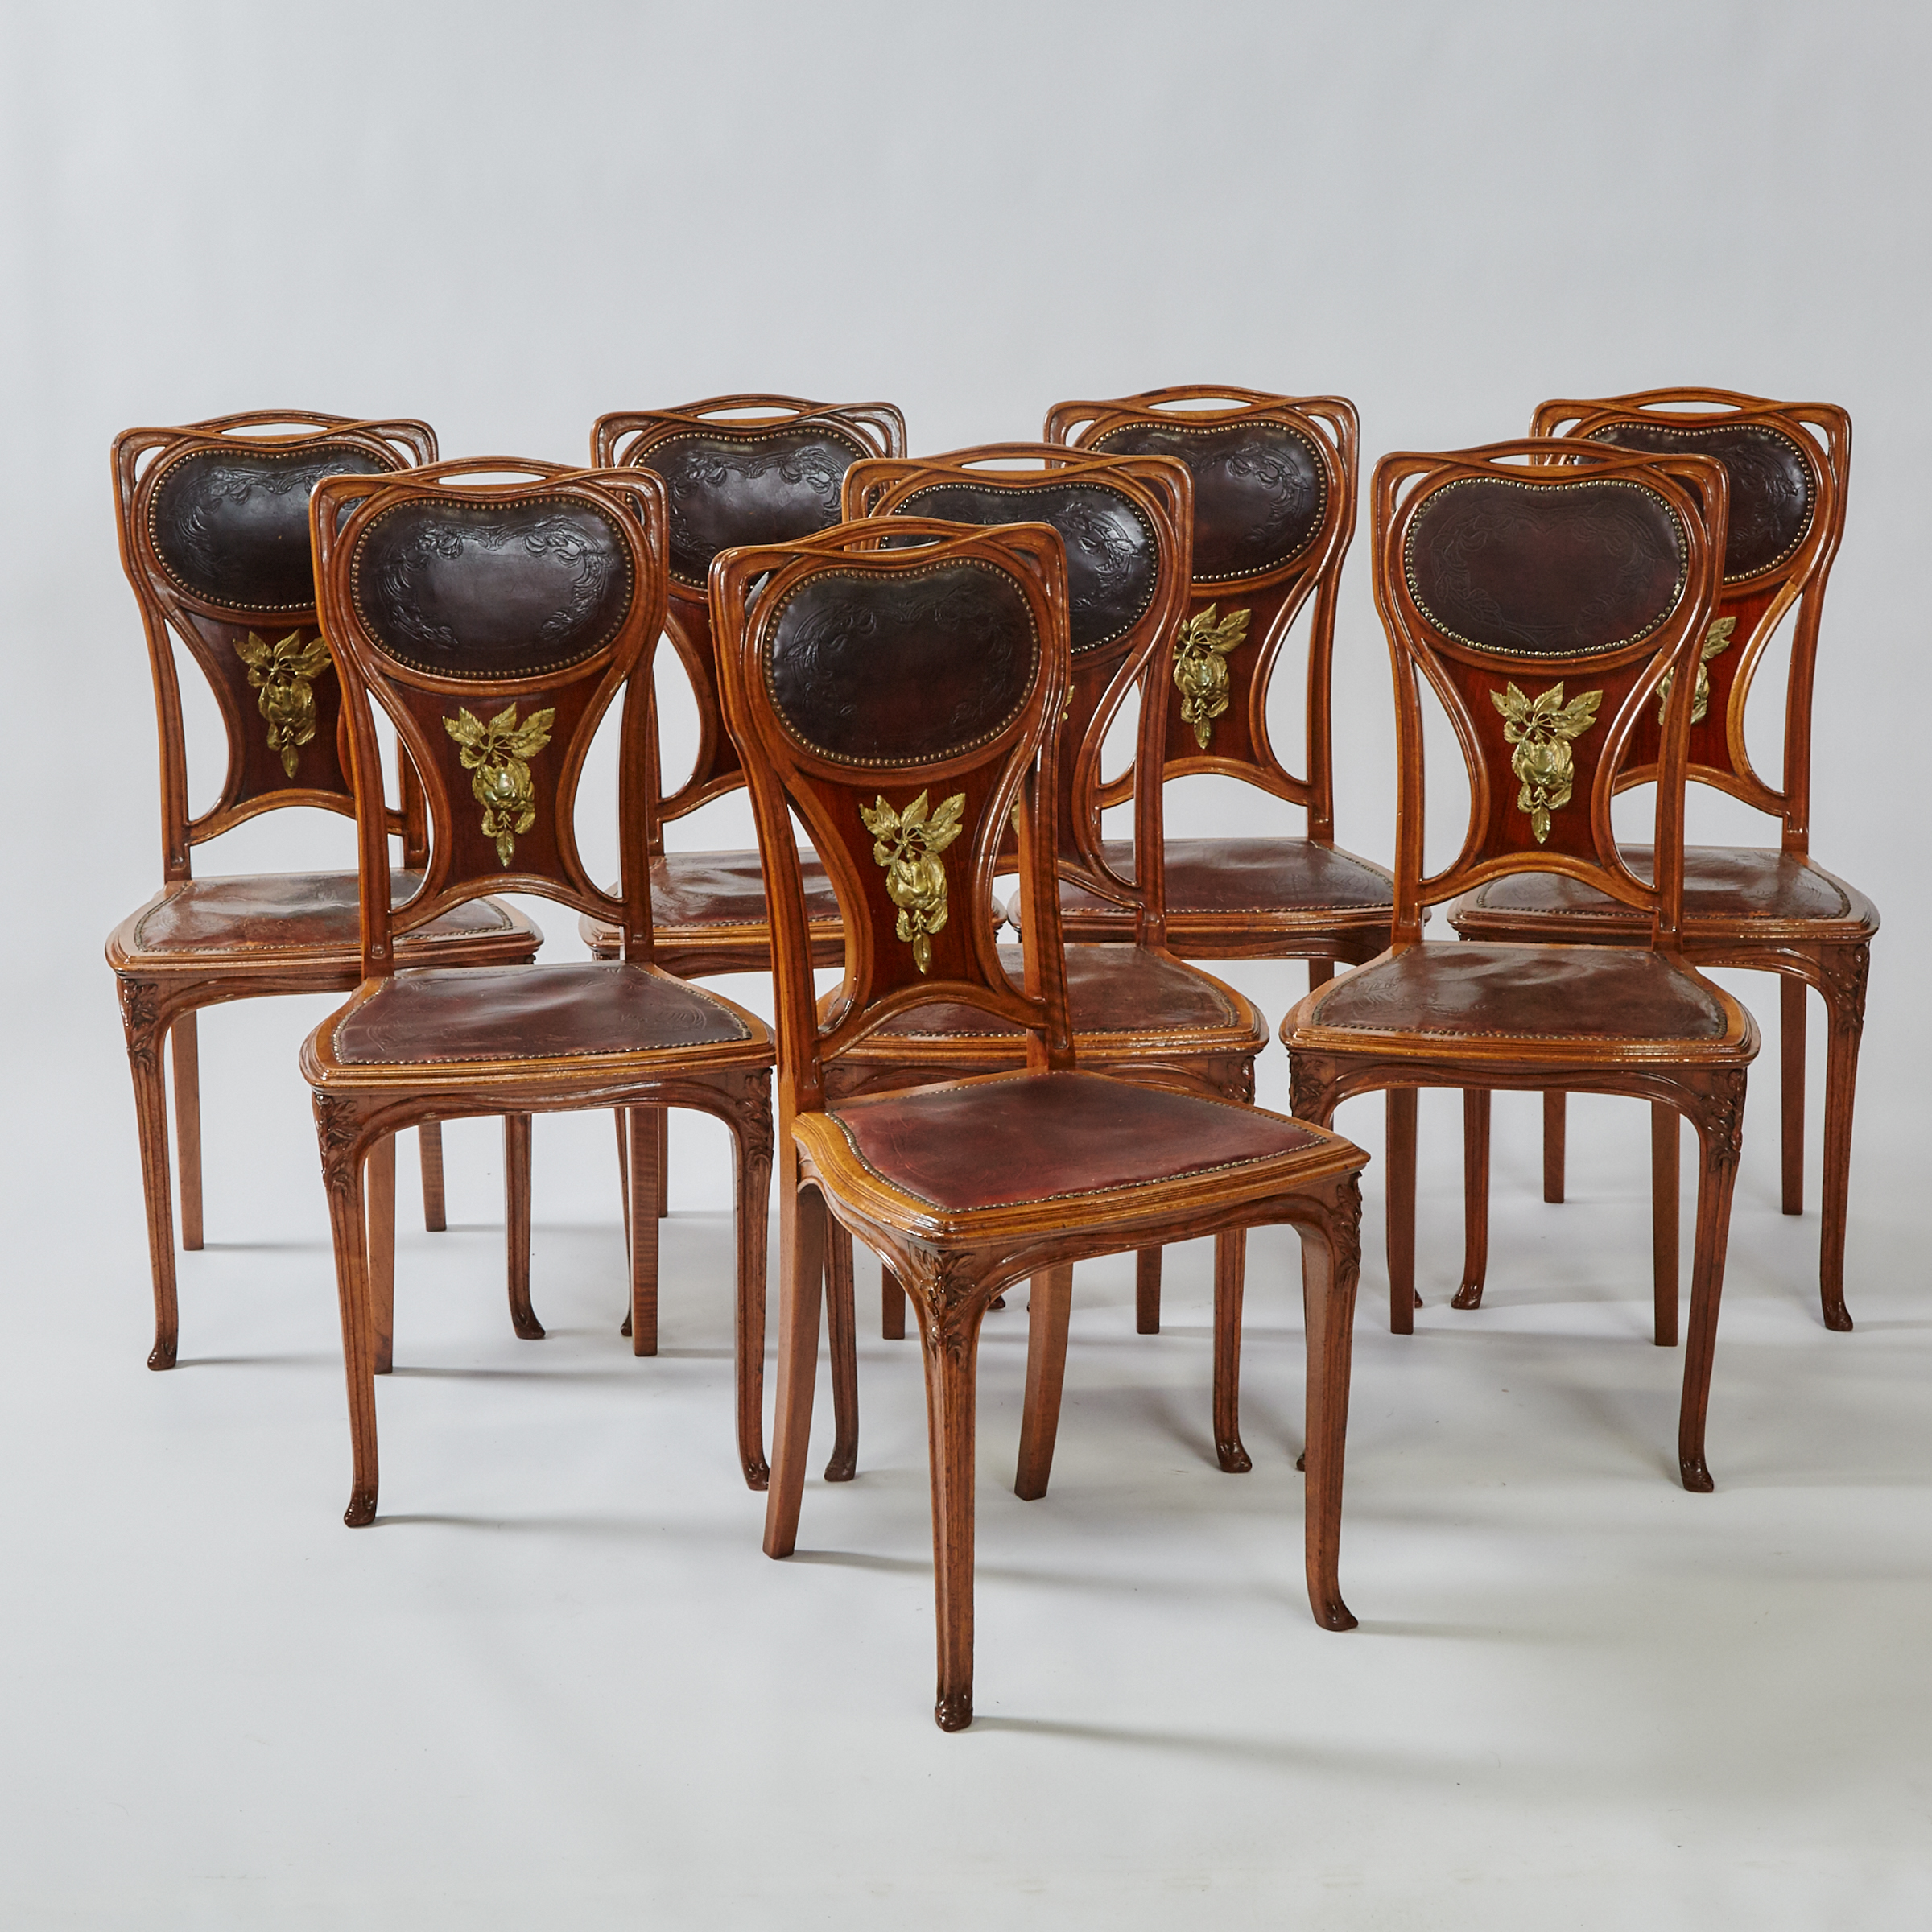 Set of Eight Louis Majorelle French Art Nouveau Ormolu Mounted Walnut and Rosewood Dining Chairs, 19th/early 19th century